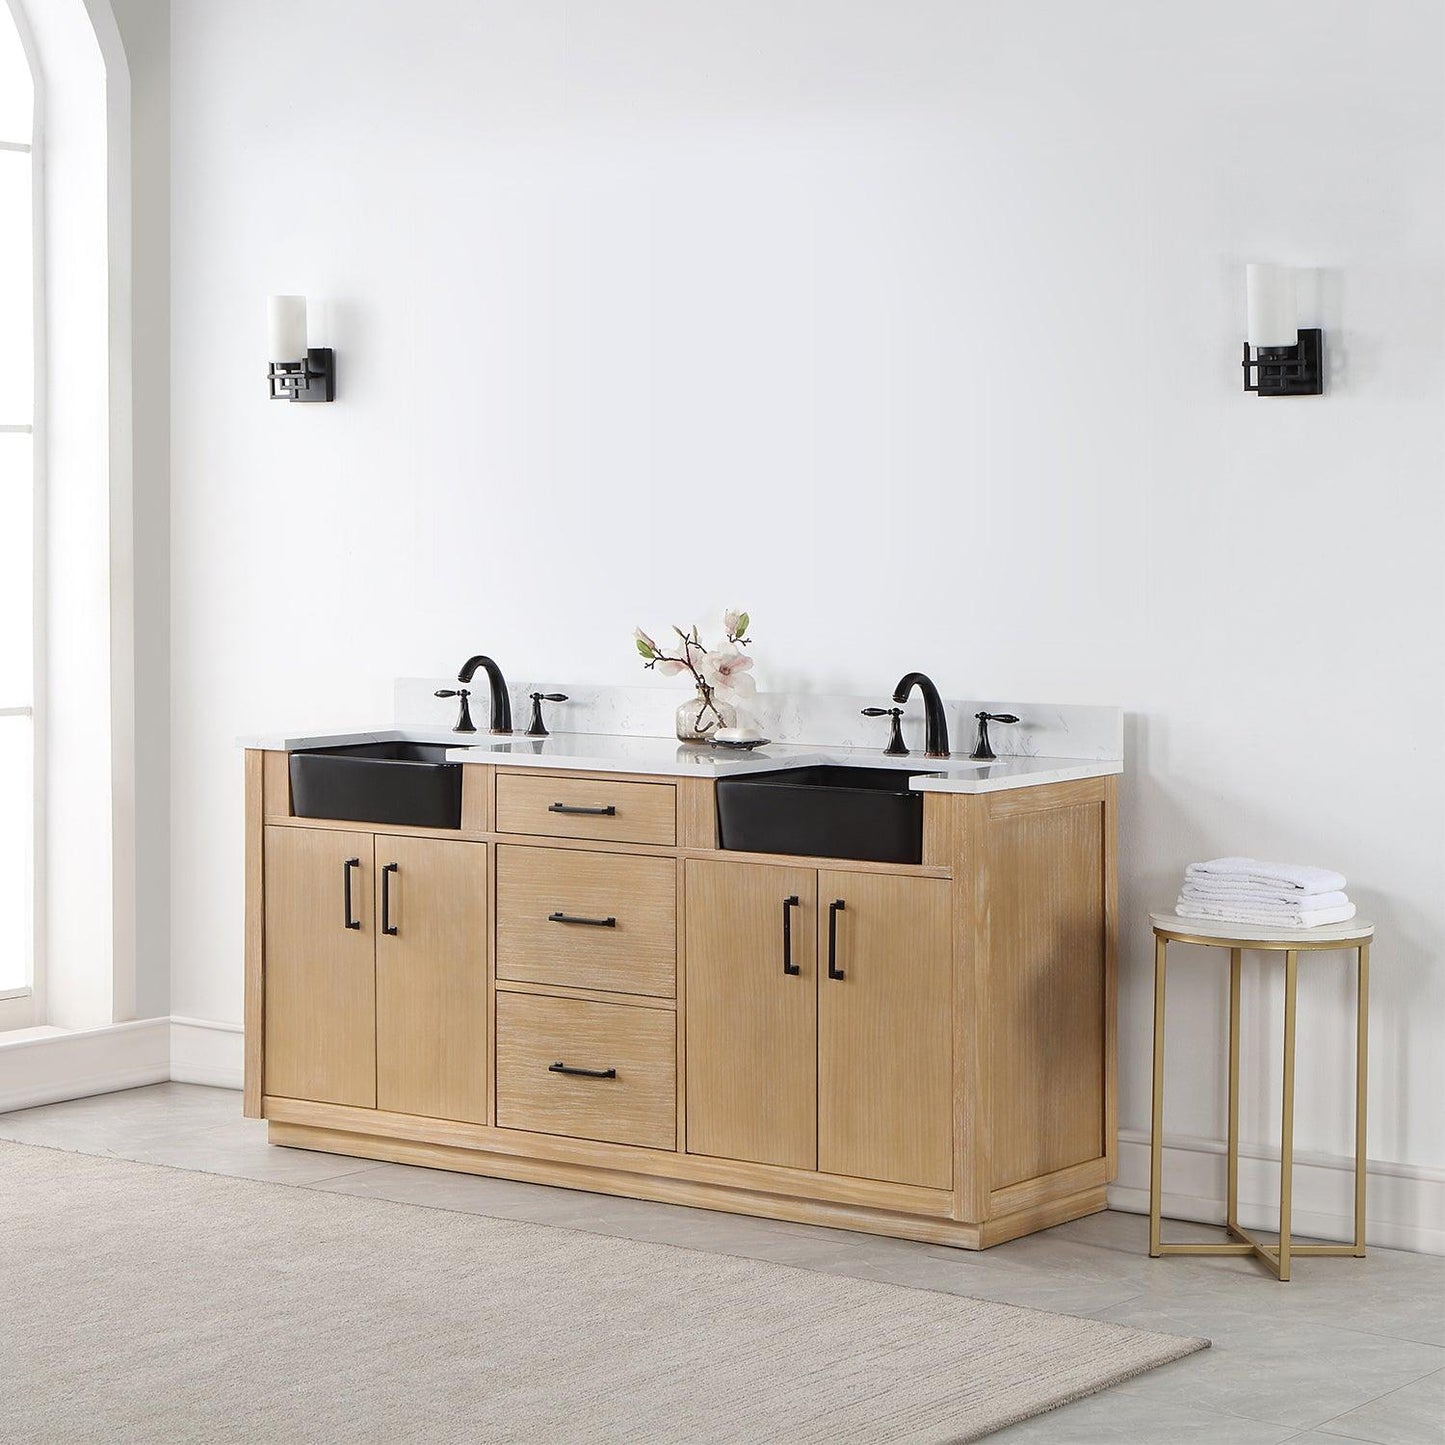 Altair Novago Double Bathroom Vanity in Weathered Pine with Aosta White Composite Stone Countertop and Farmhouse Sink with Optional Mirror - Sea & Stone Bath